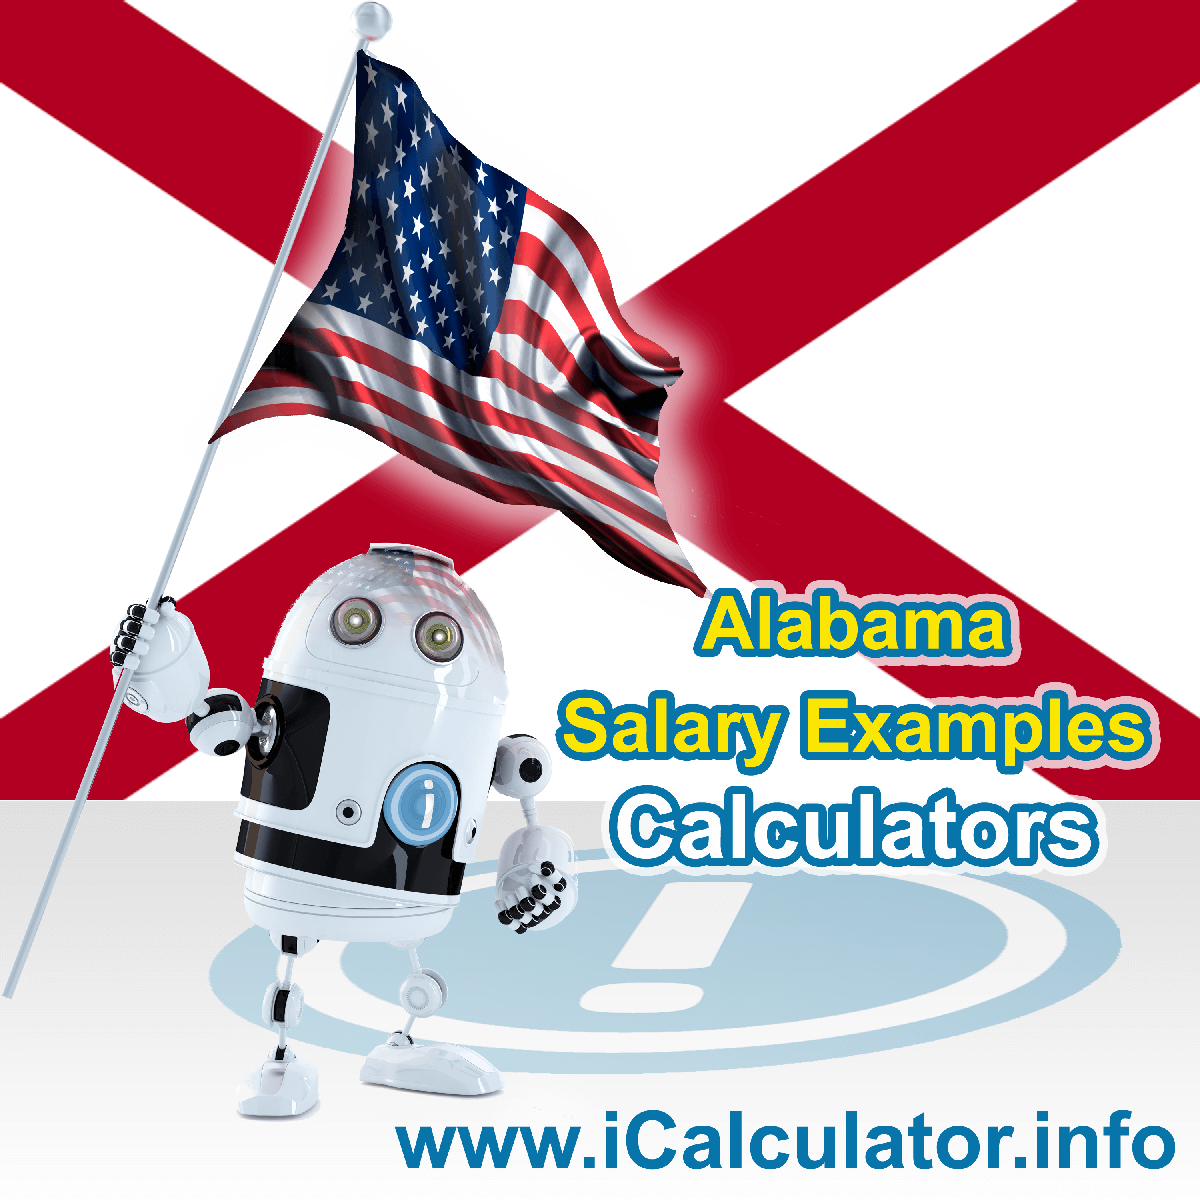 Alabama Salary Example for $ 300,000.00 in 2023 | iCalculator™ | $ 300,000.00 salary example for employee and employer paying Alabama State tincome taxes. Detailed salary after tax calculation including Alabama State Tax, Federal State Tax, Medicare Deductions, Social Security, Capital Gains and other income tax and salary deductions complete with supporting Alabama state tax tables 